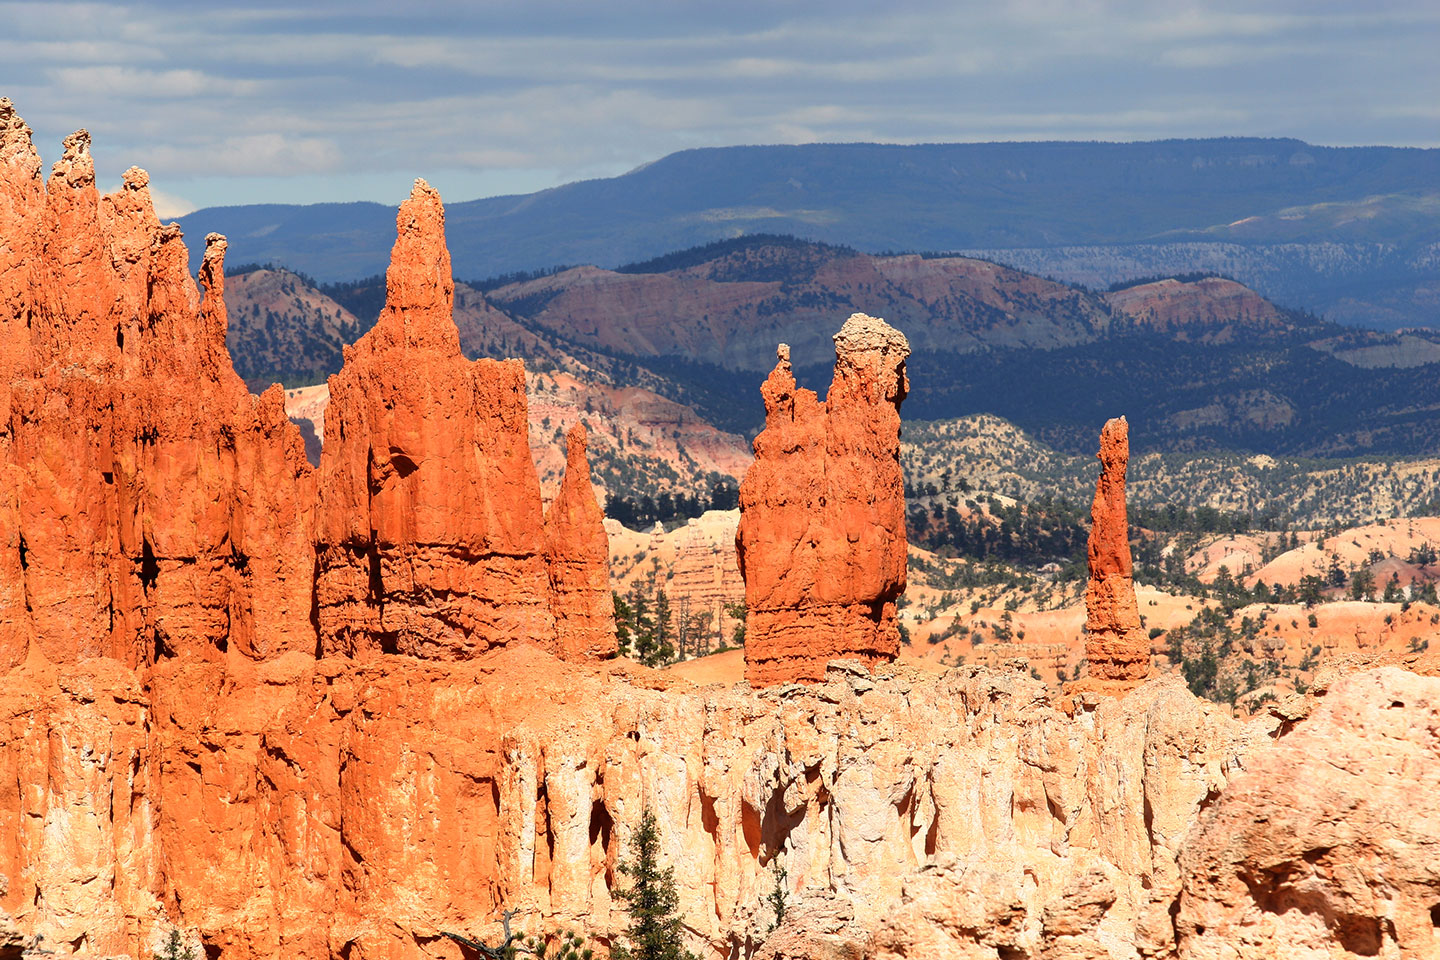 Wall of windows in Bryce Canyon National Park, Utah